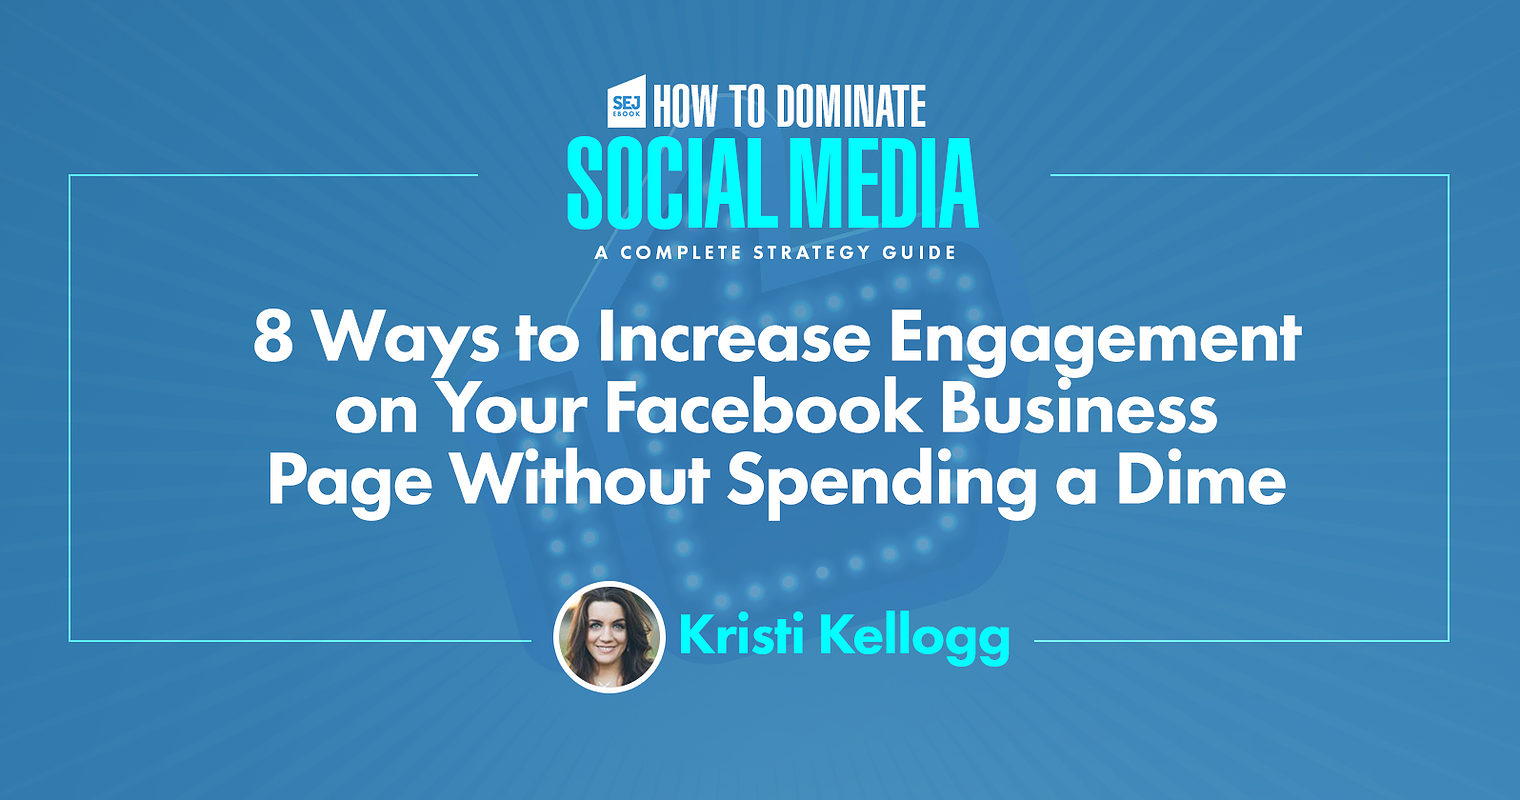 8 Ways to Increase Engagement on Your Facebook Business Page